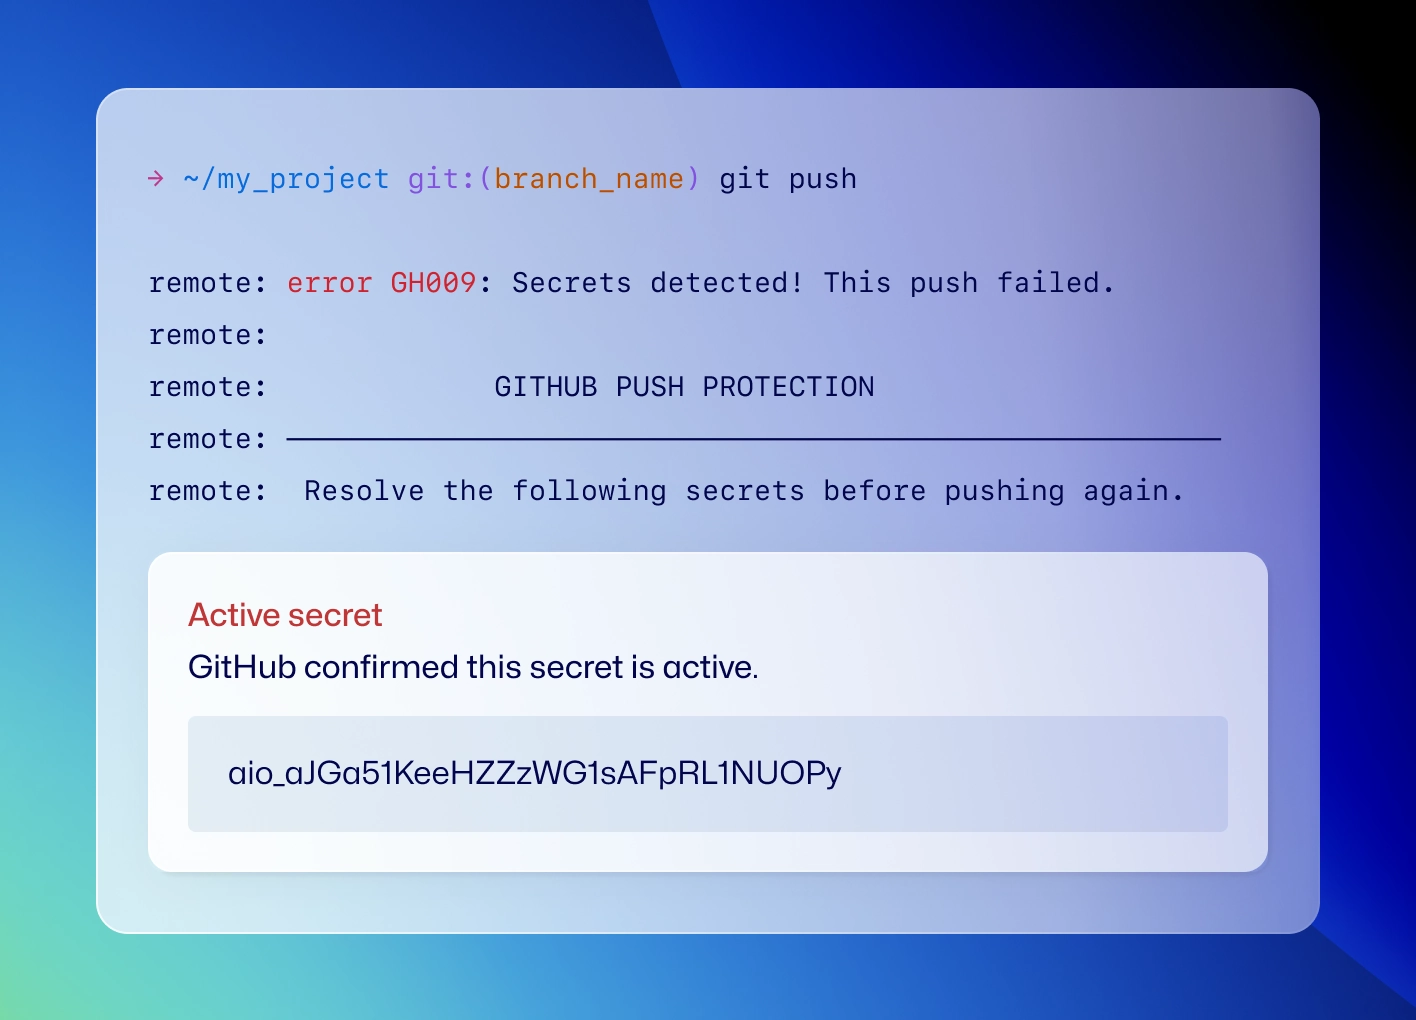 GitHub push protection confirms an active secret and blocks the push